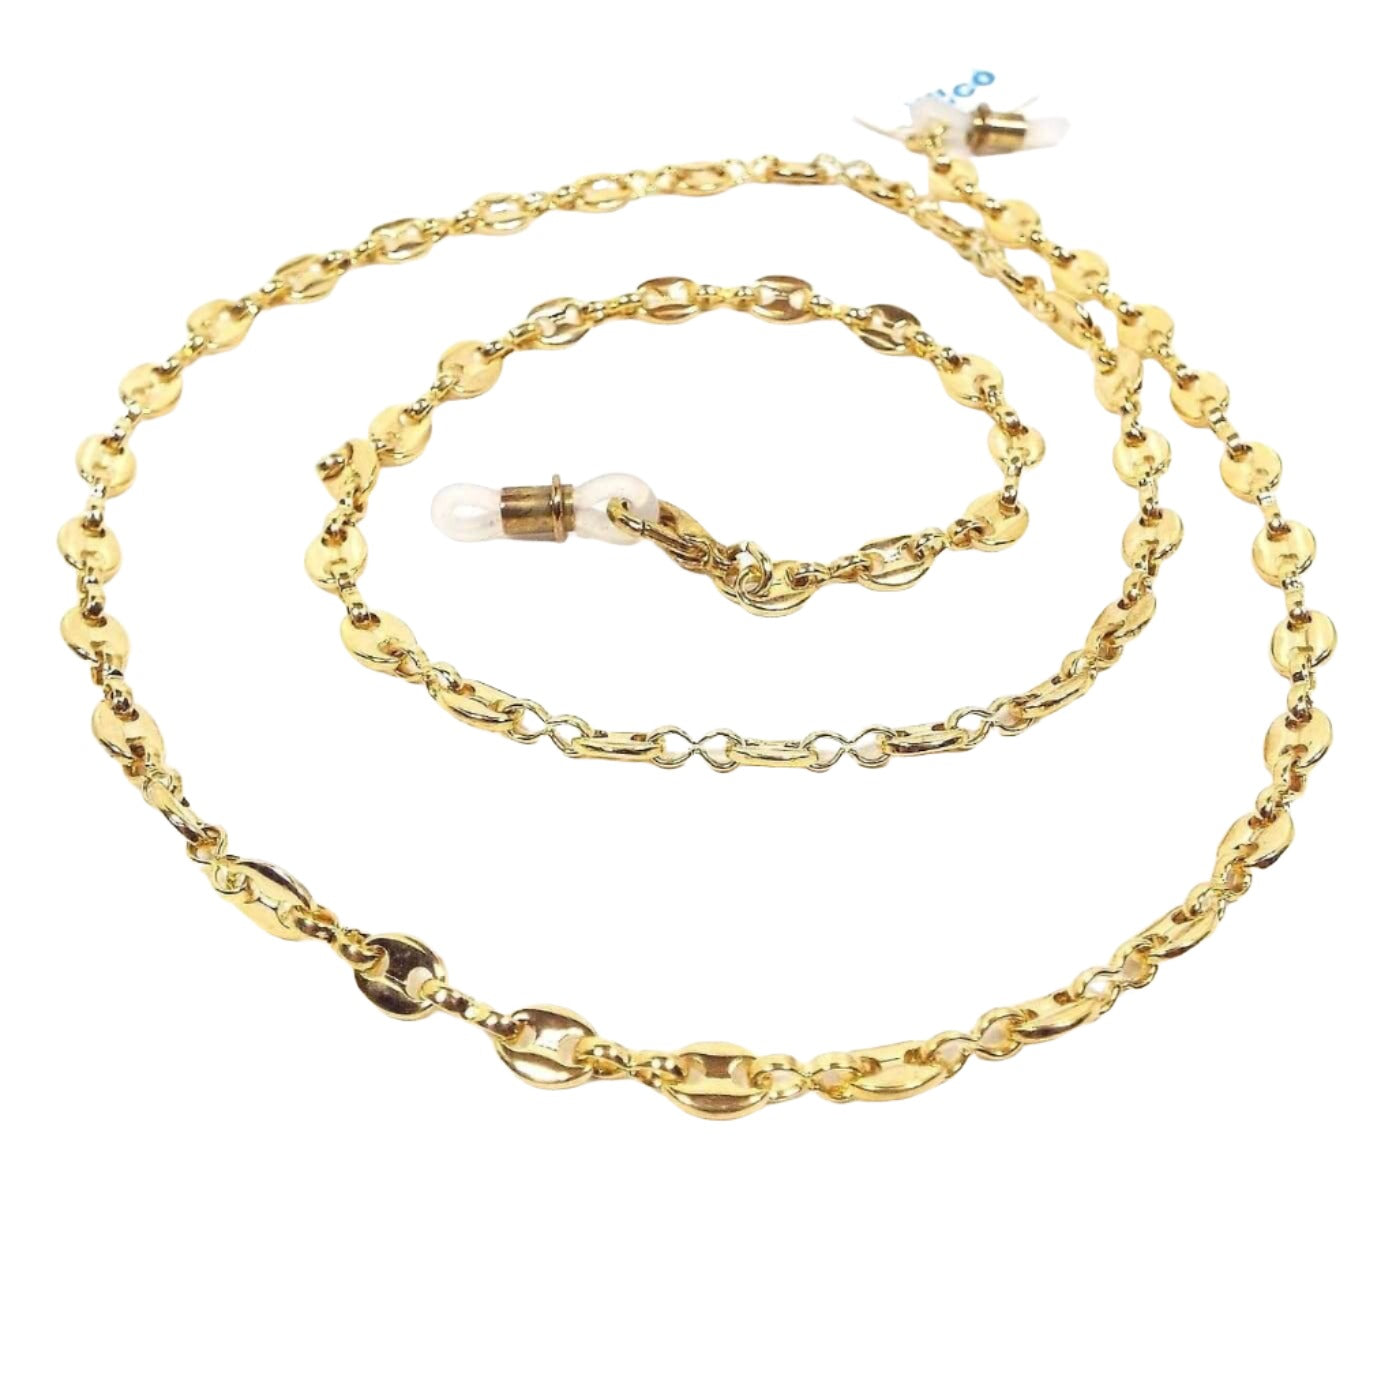 Top view of the retro vintage Hilco vision eyeglass chain. It has an anchor chain with oval links that have two holes that are linked together with figure eight shaped links. The metal is gold tone in color. There is a silicone band at each end to slide over the eyeglass ends and one side has a paper tag that says Hilco on it.